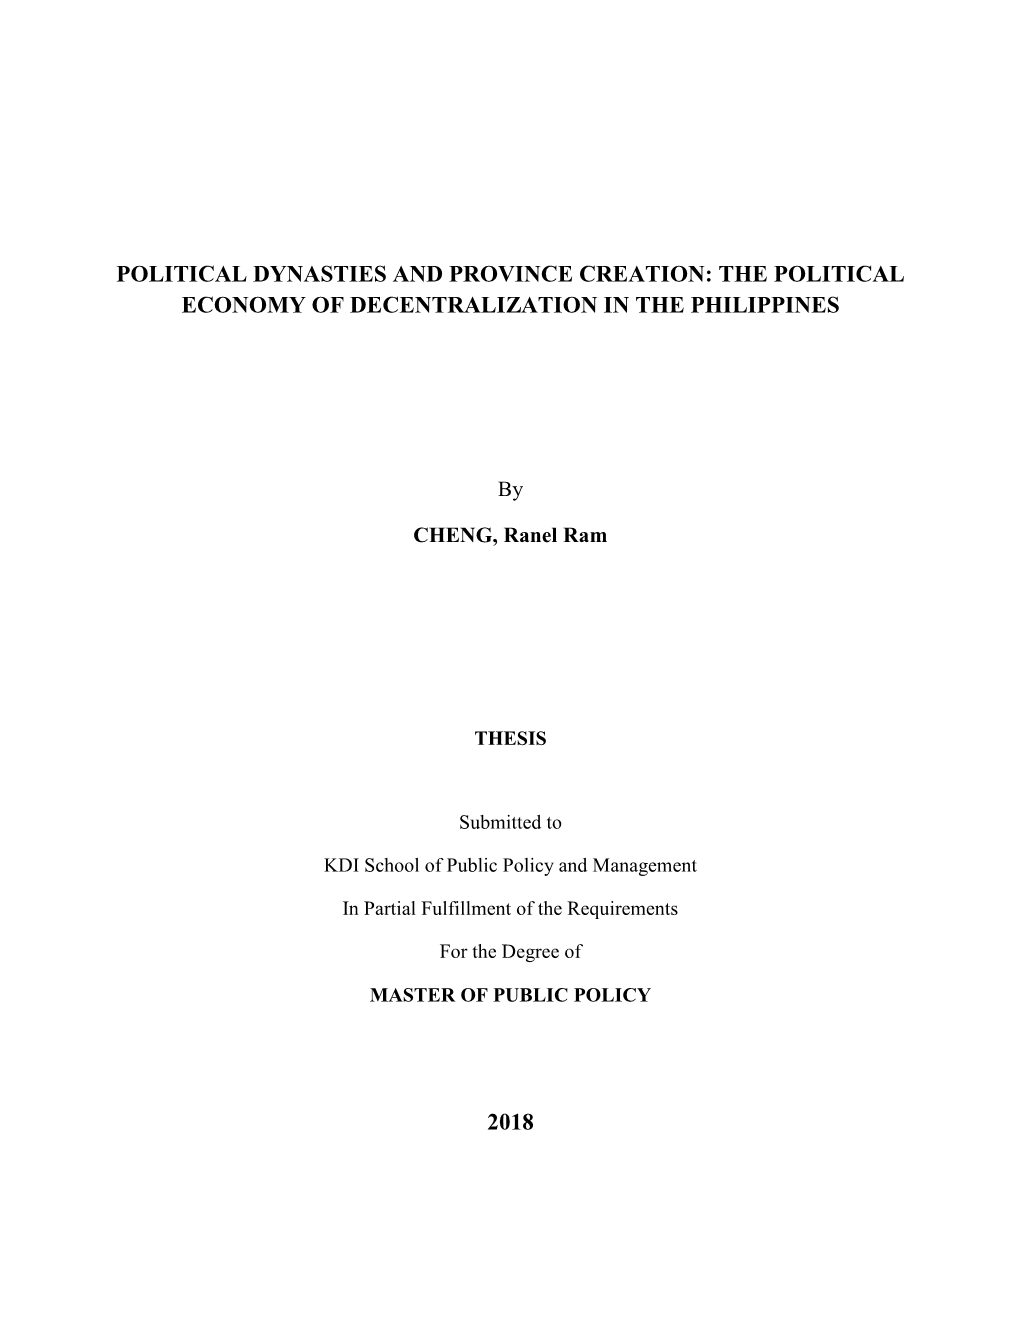 Political Dynasties and Province Creation: the Political Economy of Decentralization in the Philippines